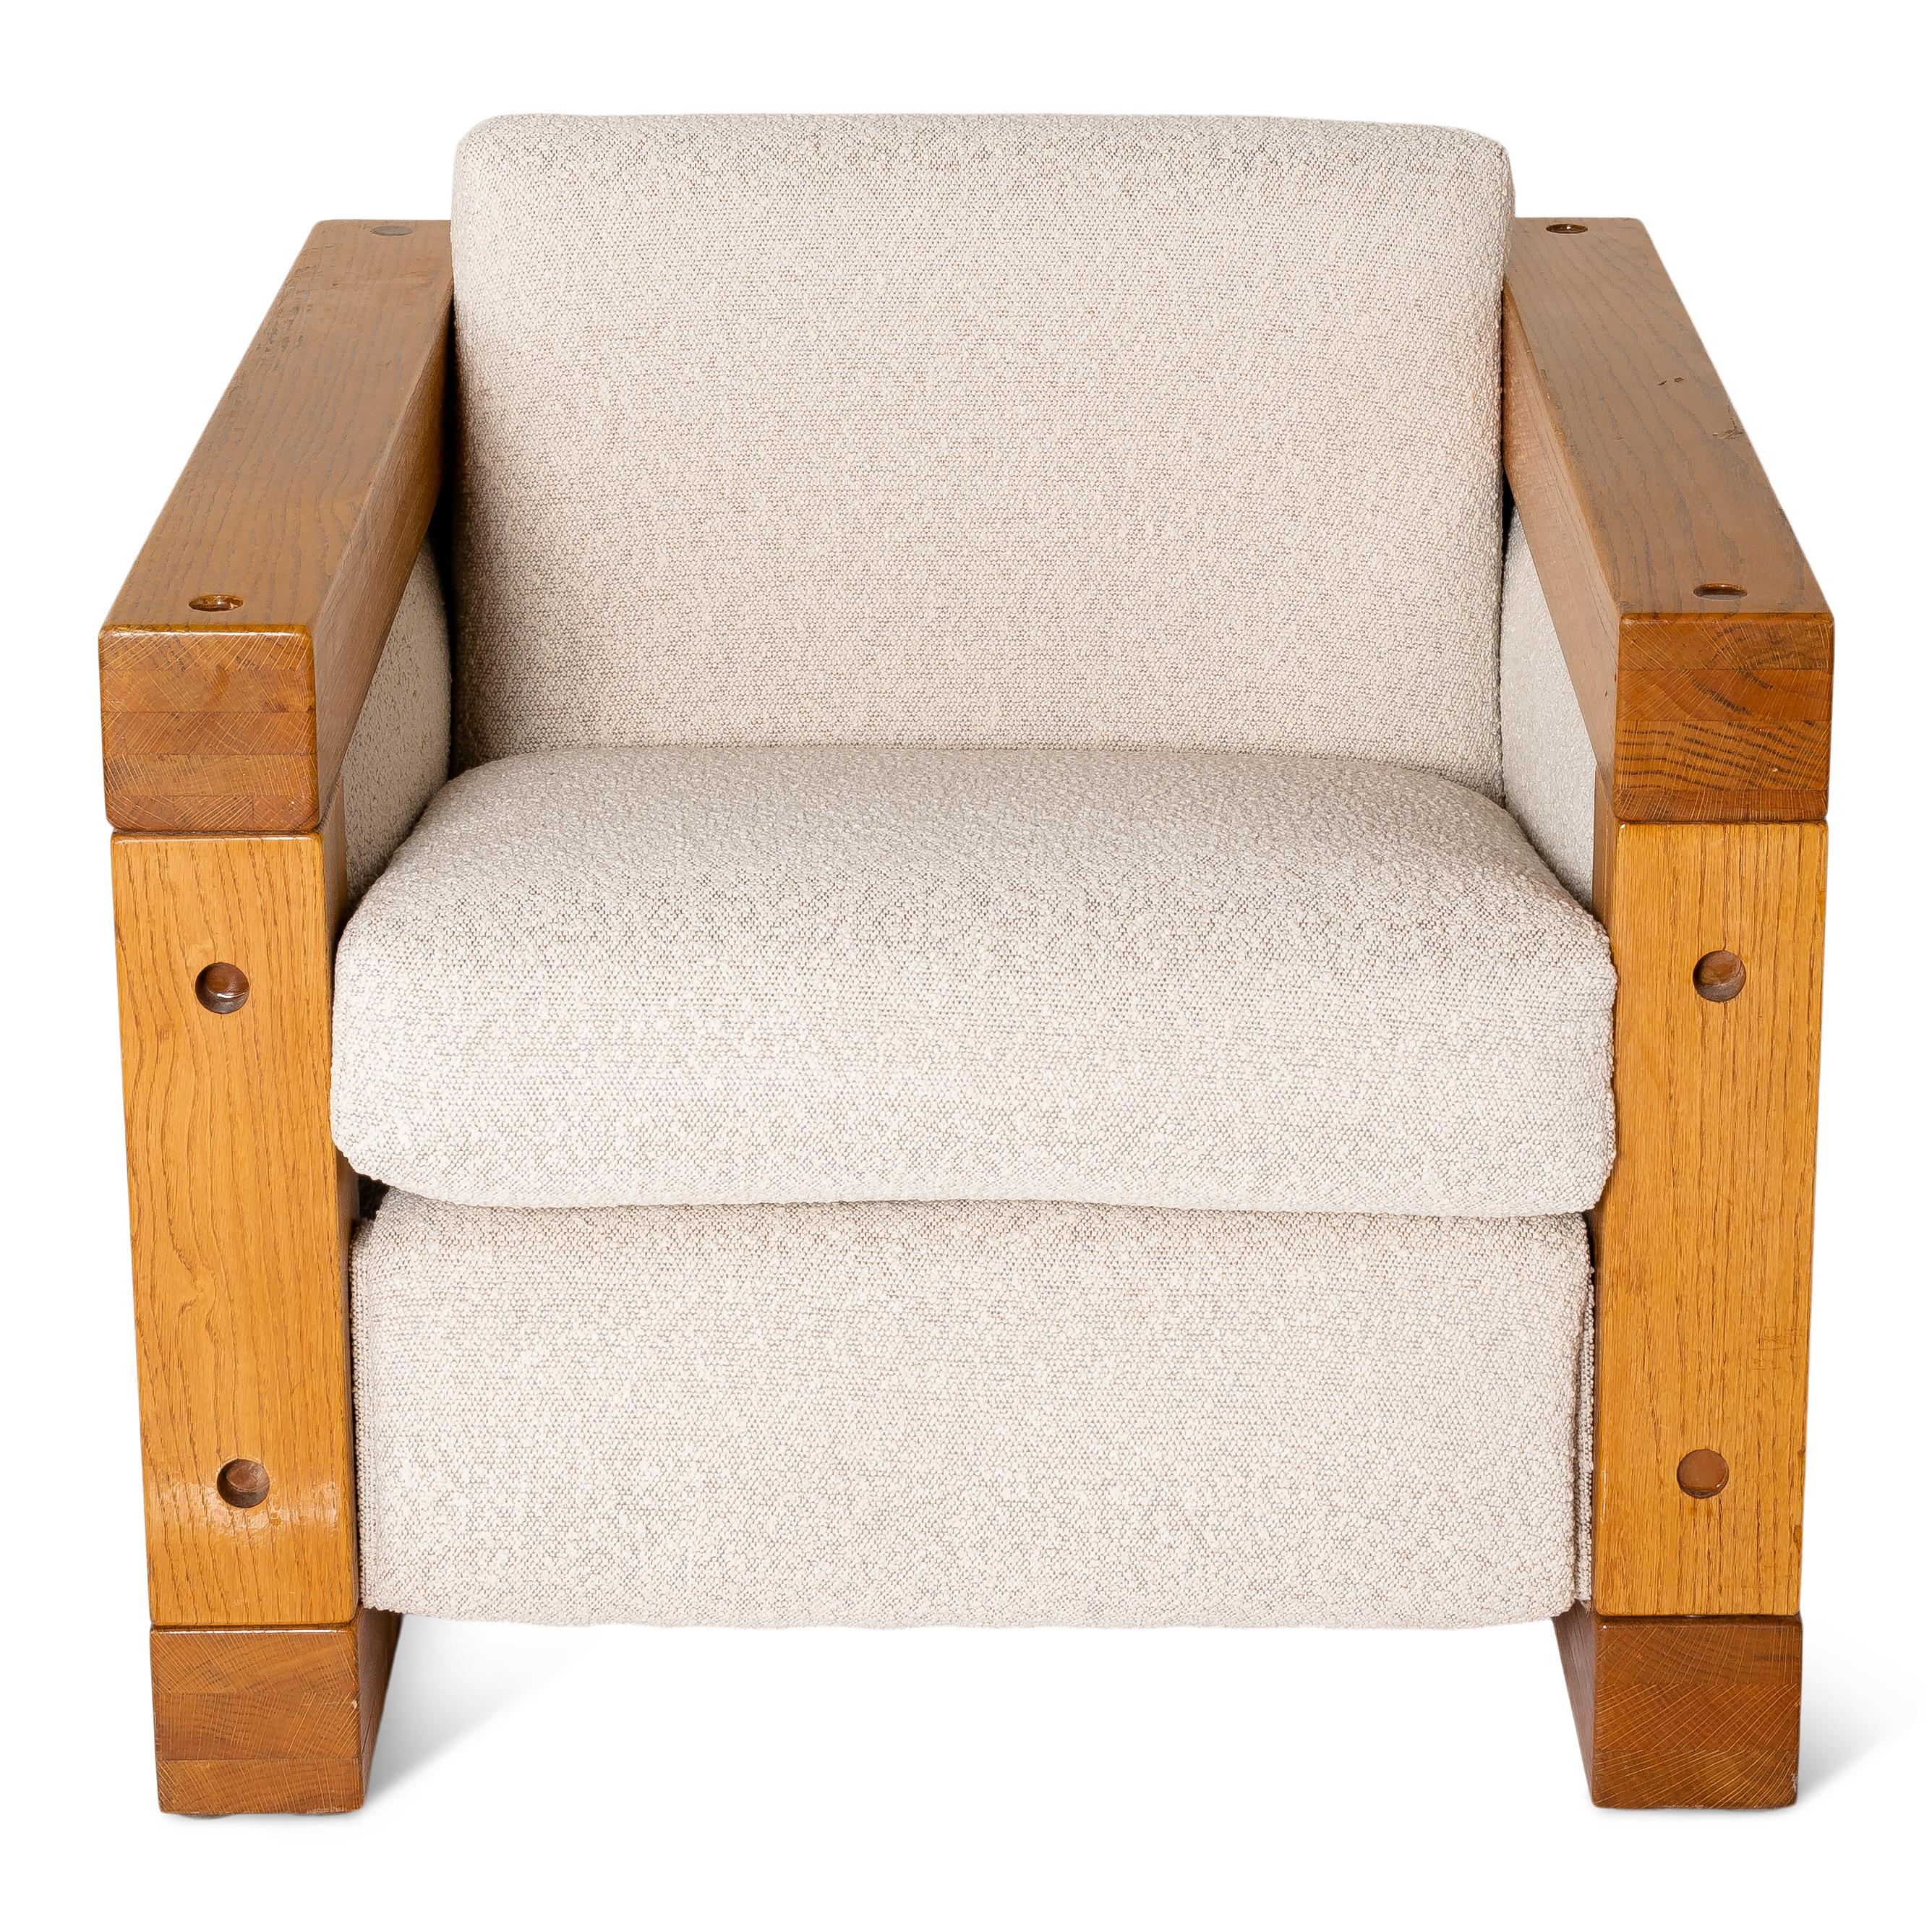 Unique pair of Mid-Century Modern Mexican club chairs with a beautifully textured fabric and structured oak frame.